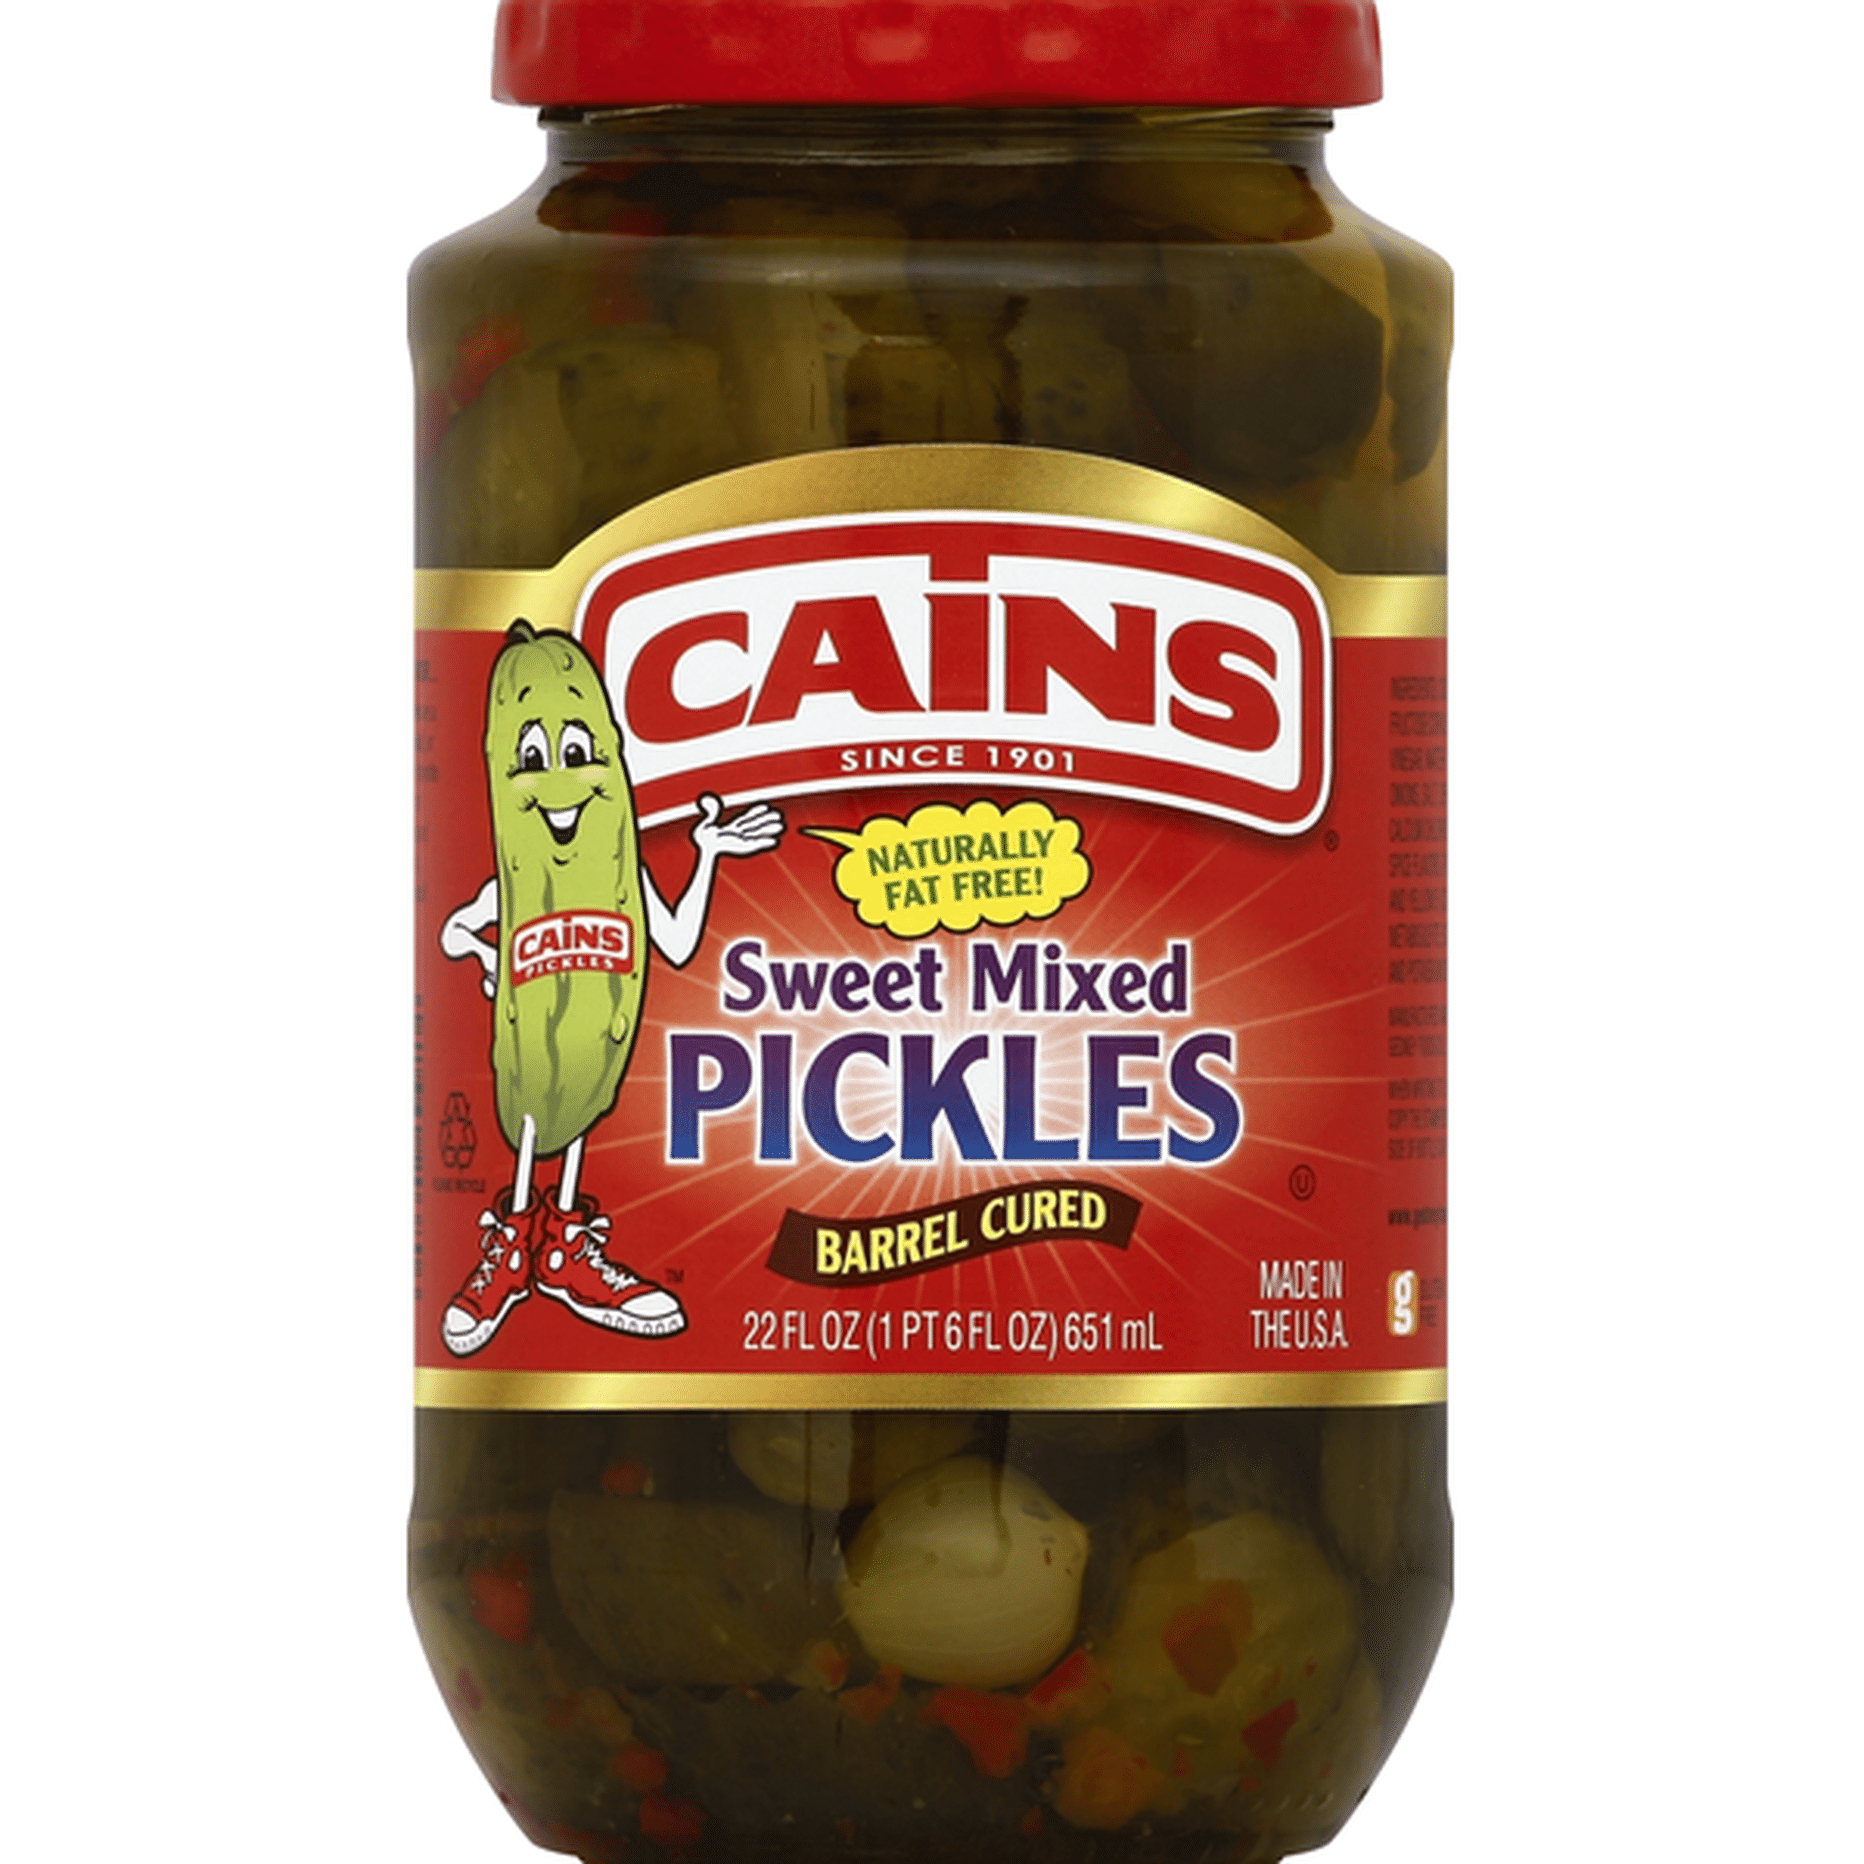 Cains Pickles, Sweet Mixed, Barrel Cured (22 oz) Delivery or Pickup ...